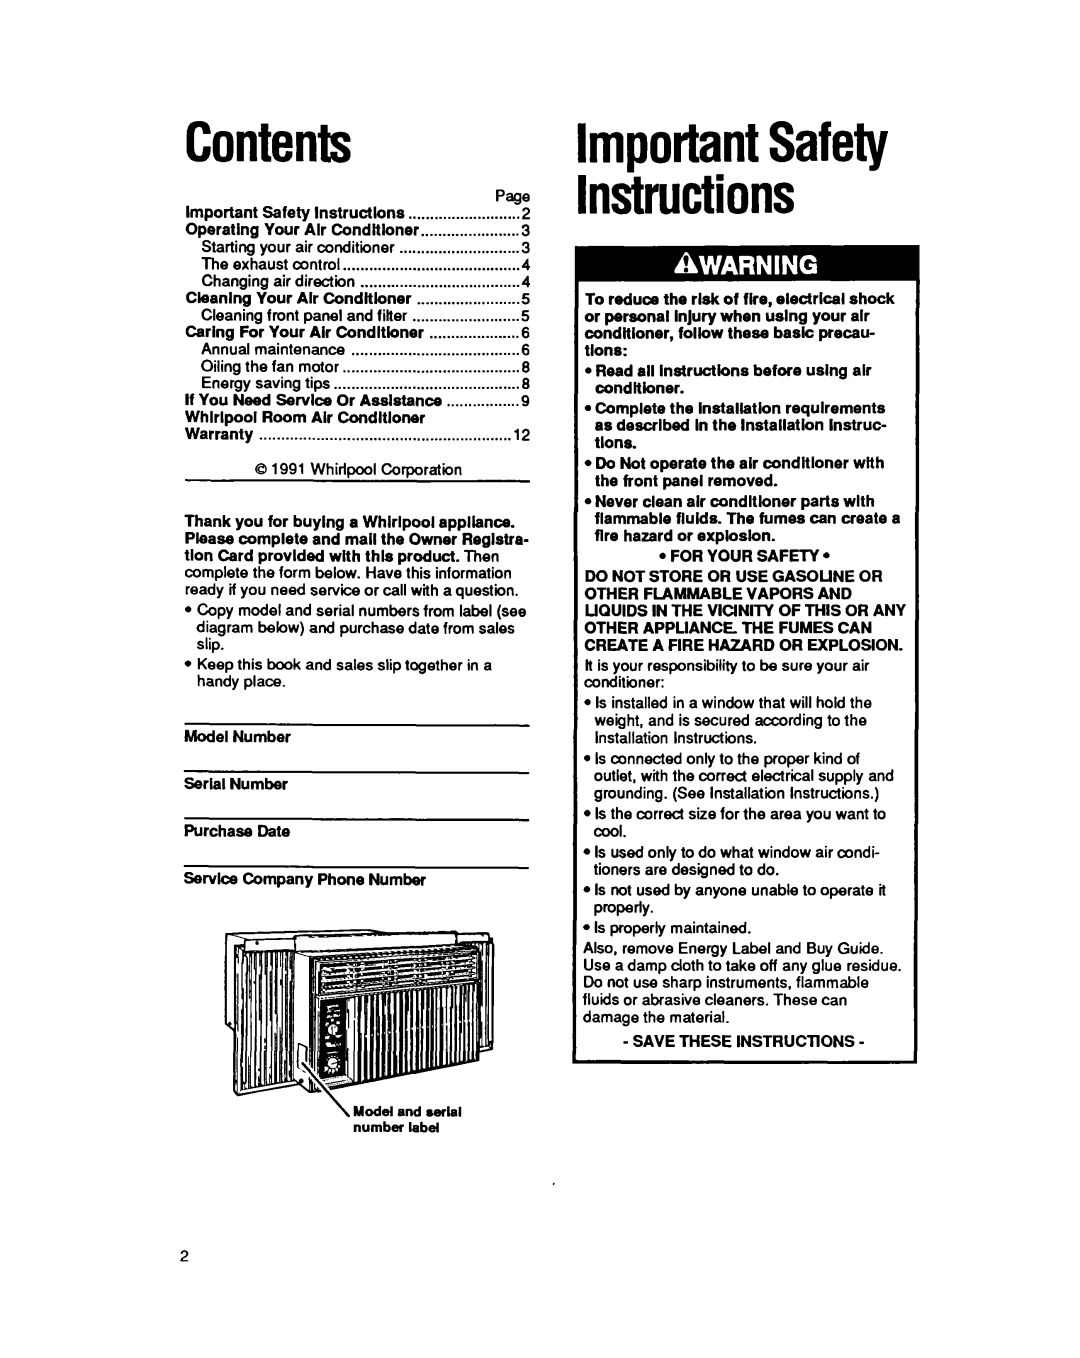 Whirlpool ACQ052, AMQ062 manual Contents, mportantSafety nstructions, Page 